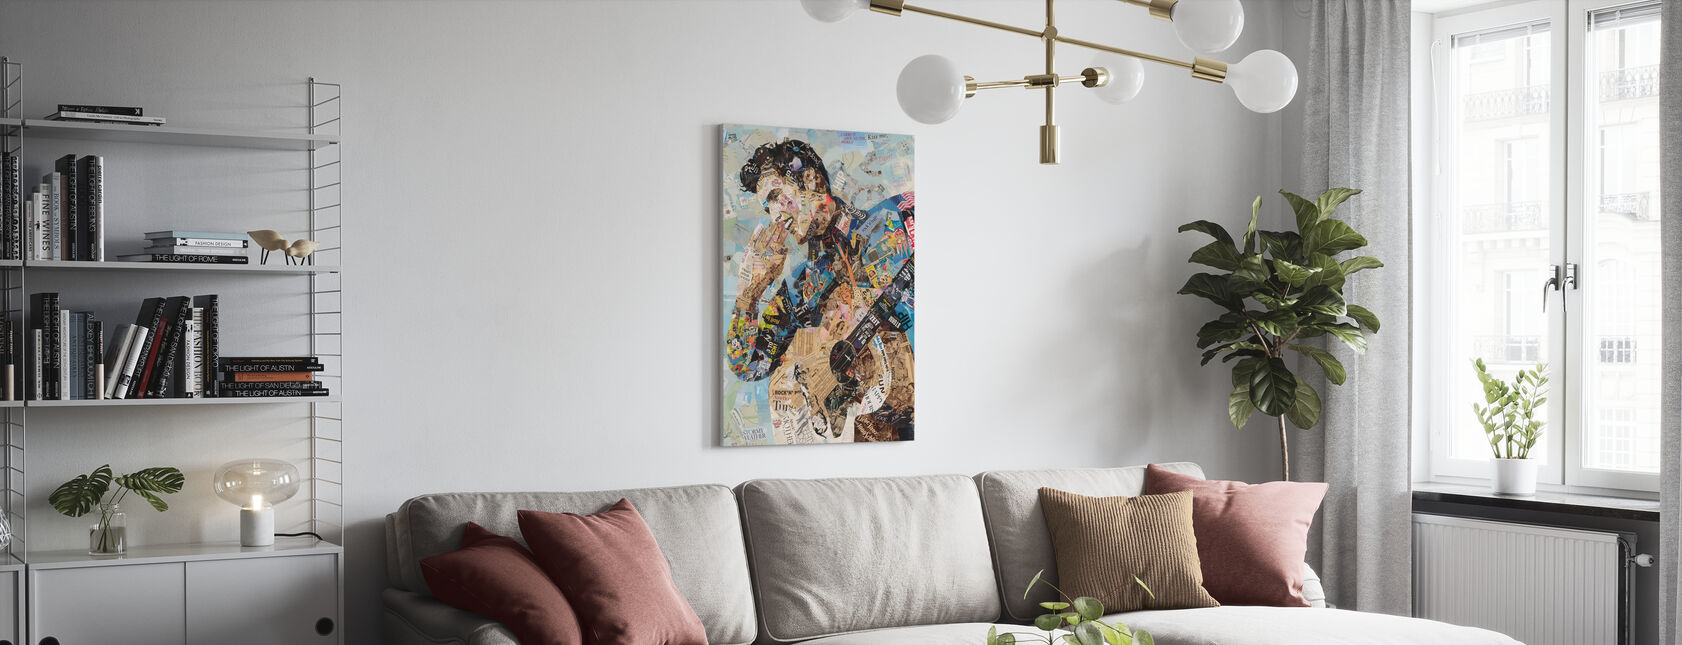 All Shook Up - Canvas print - Living Room